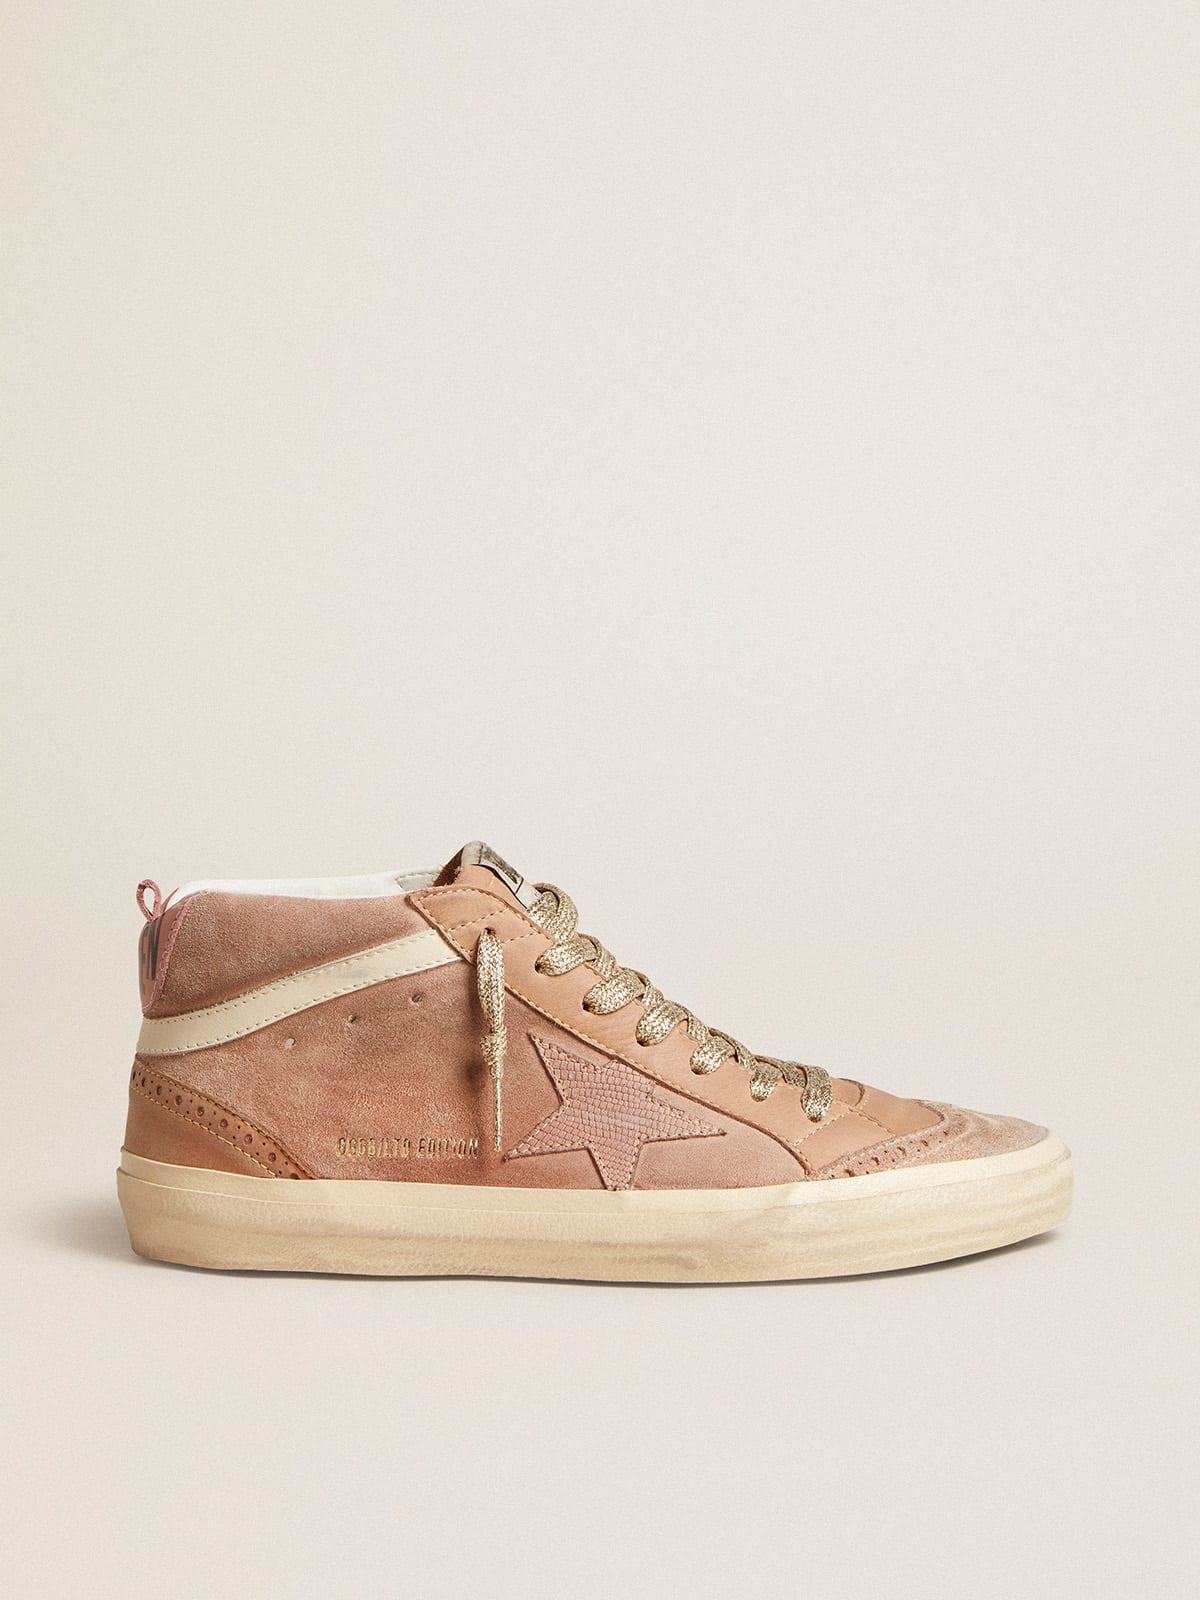 Mid Star LTD in pink suede with pink lizard-print leather star - 1